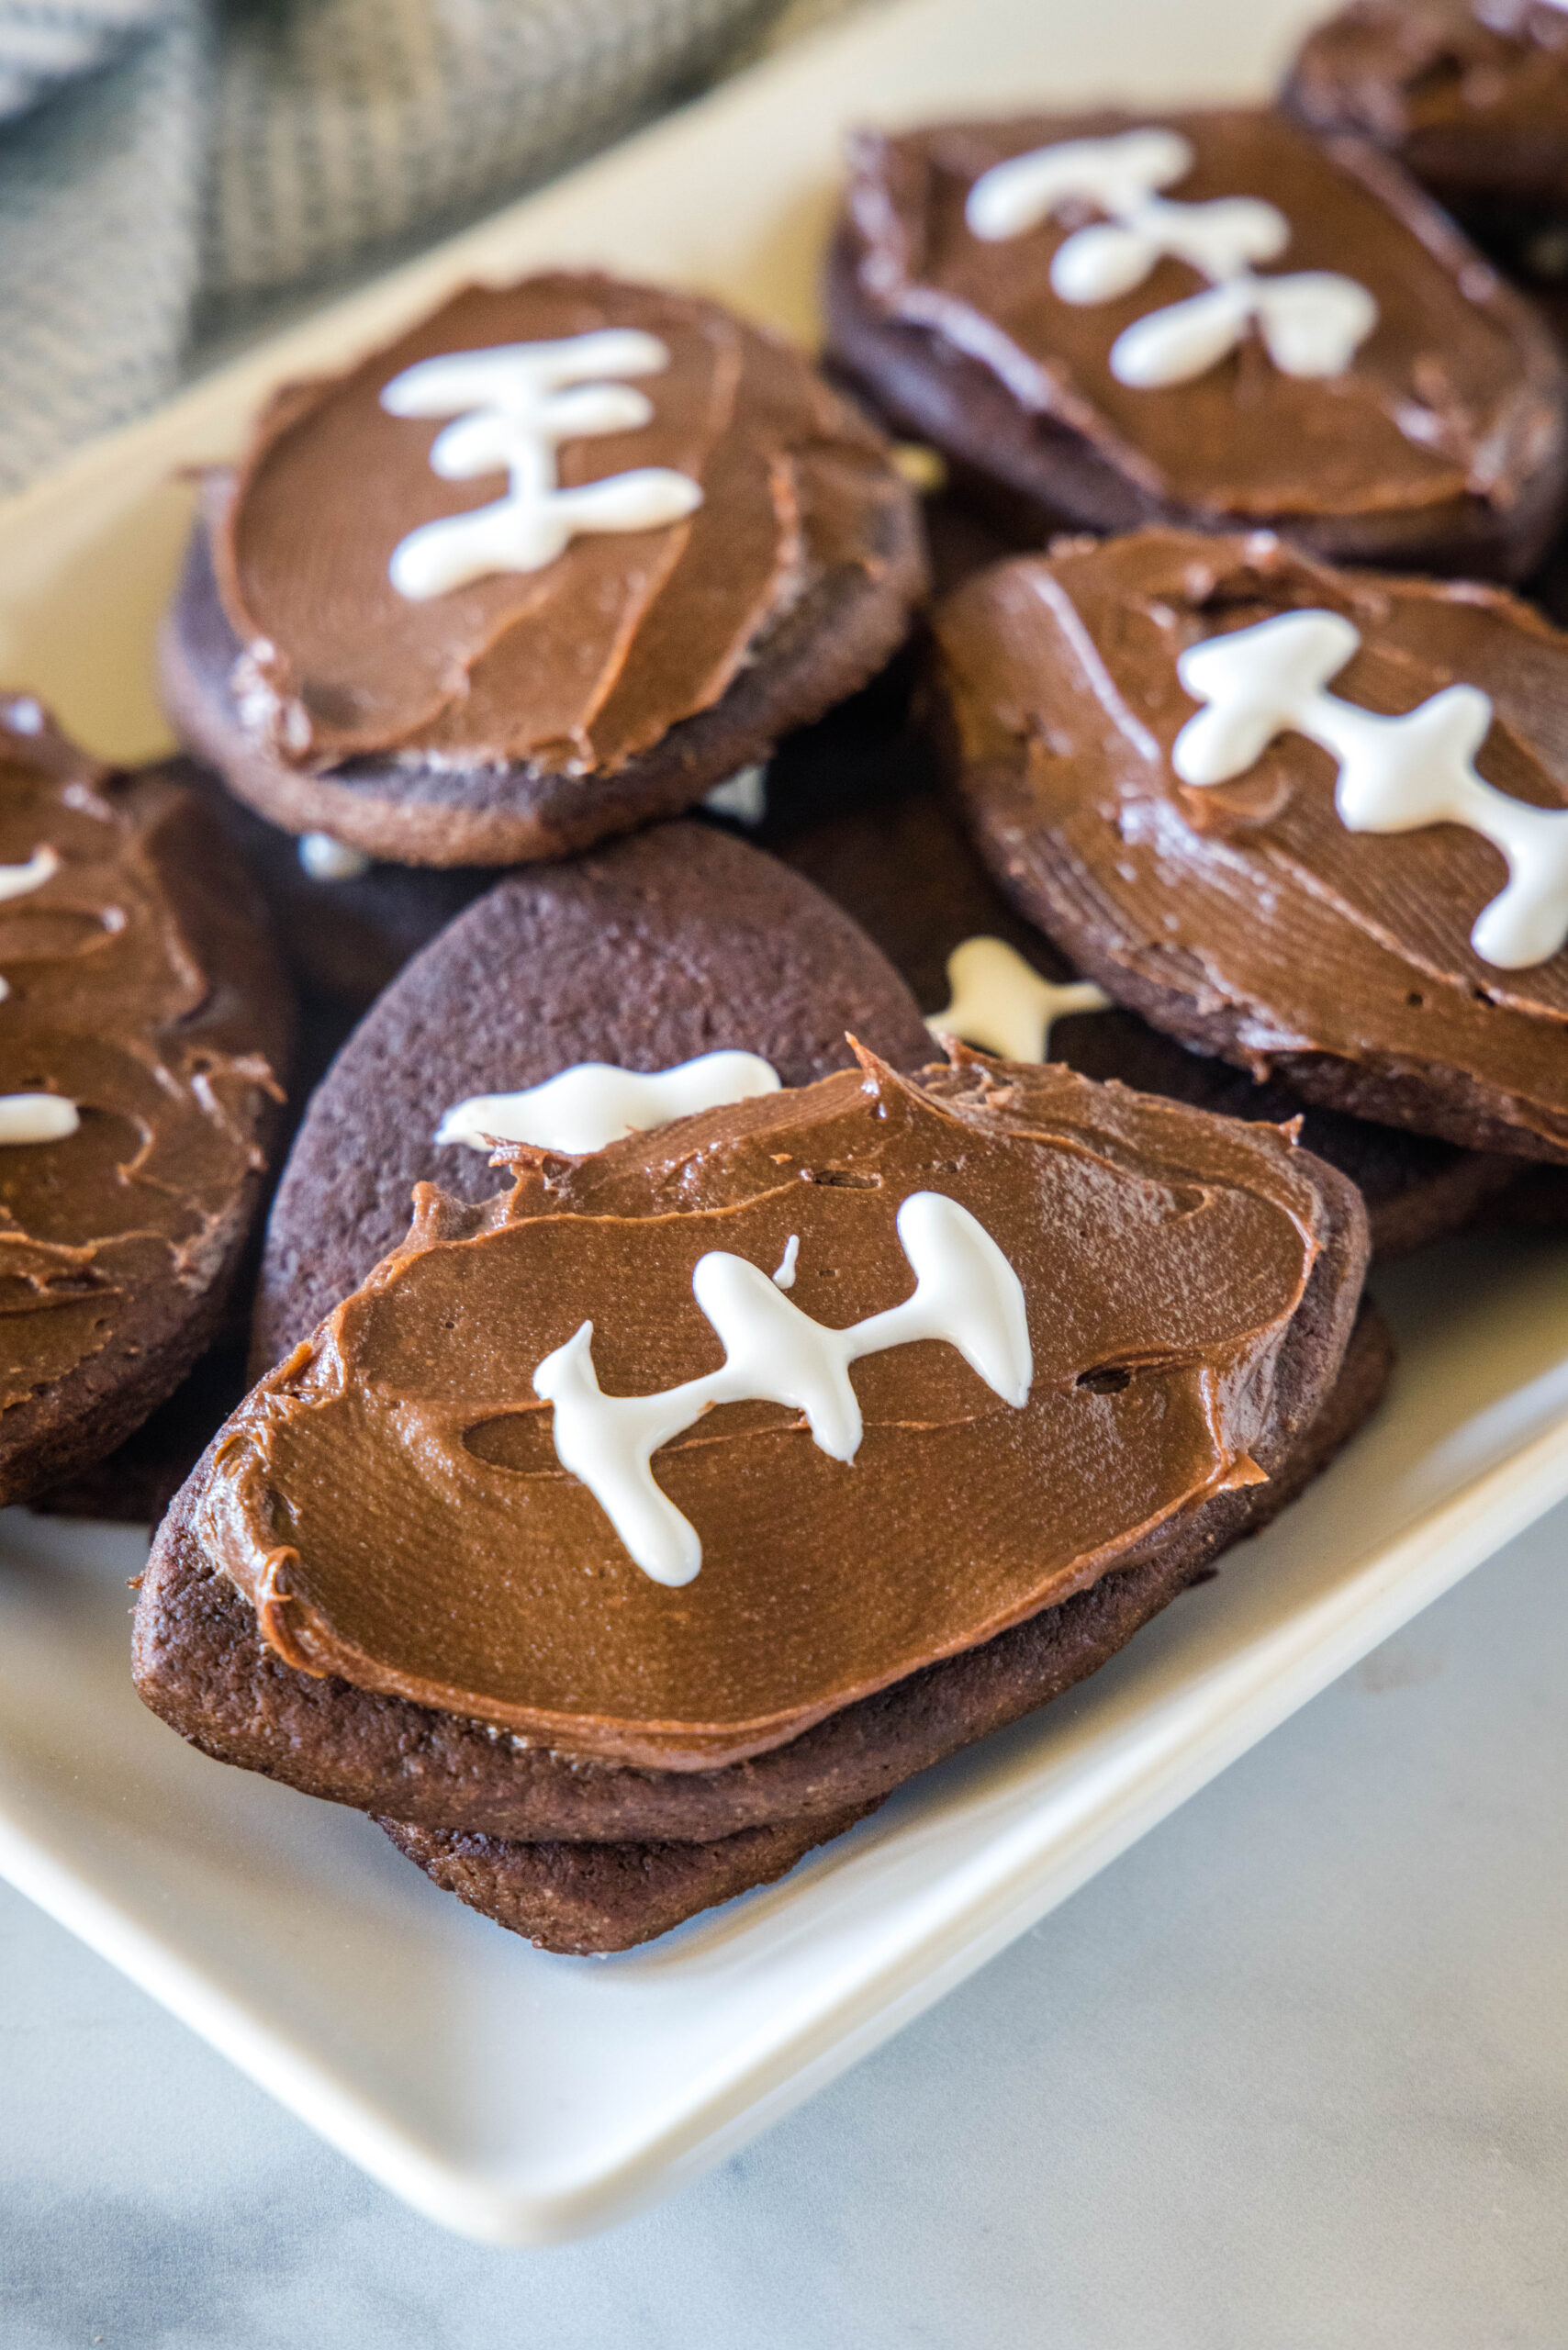 Assorted frosted football cookies on a rectangular white plate.